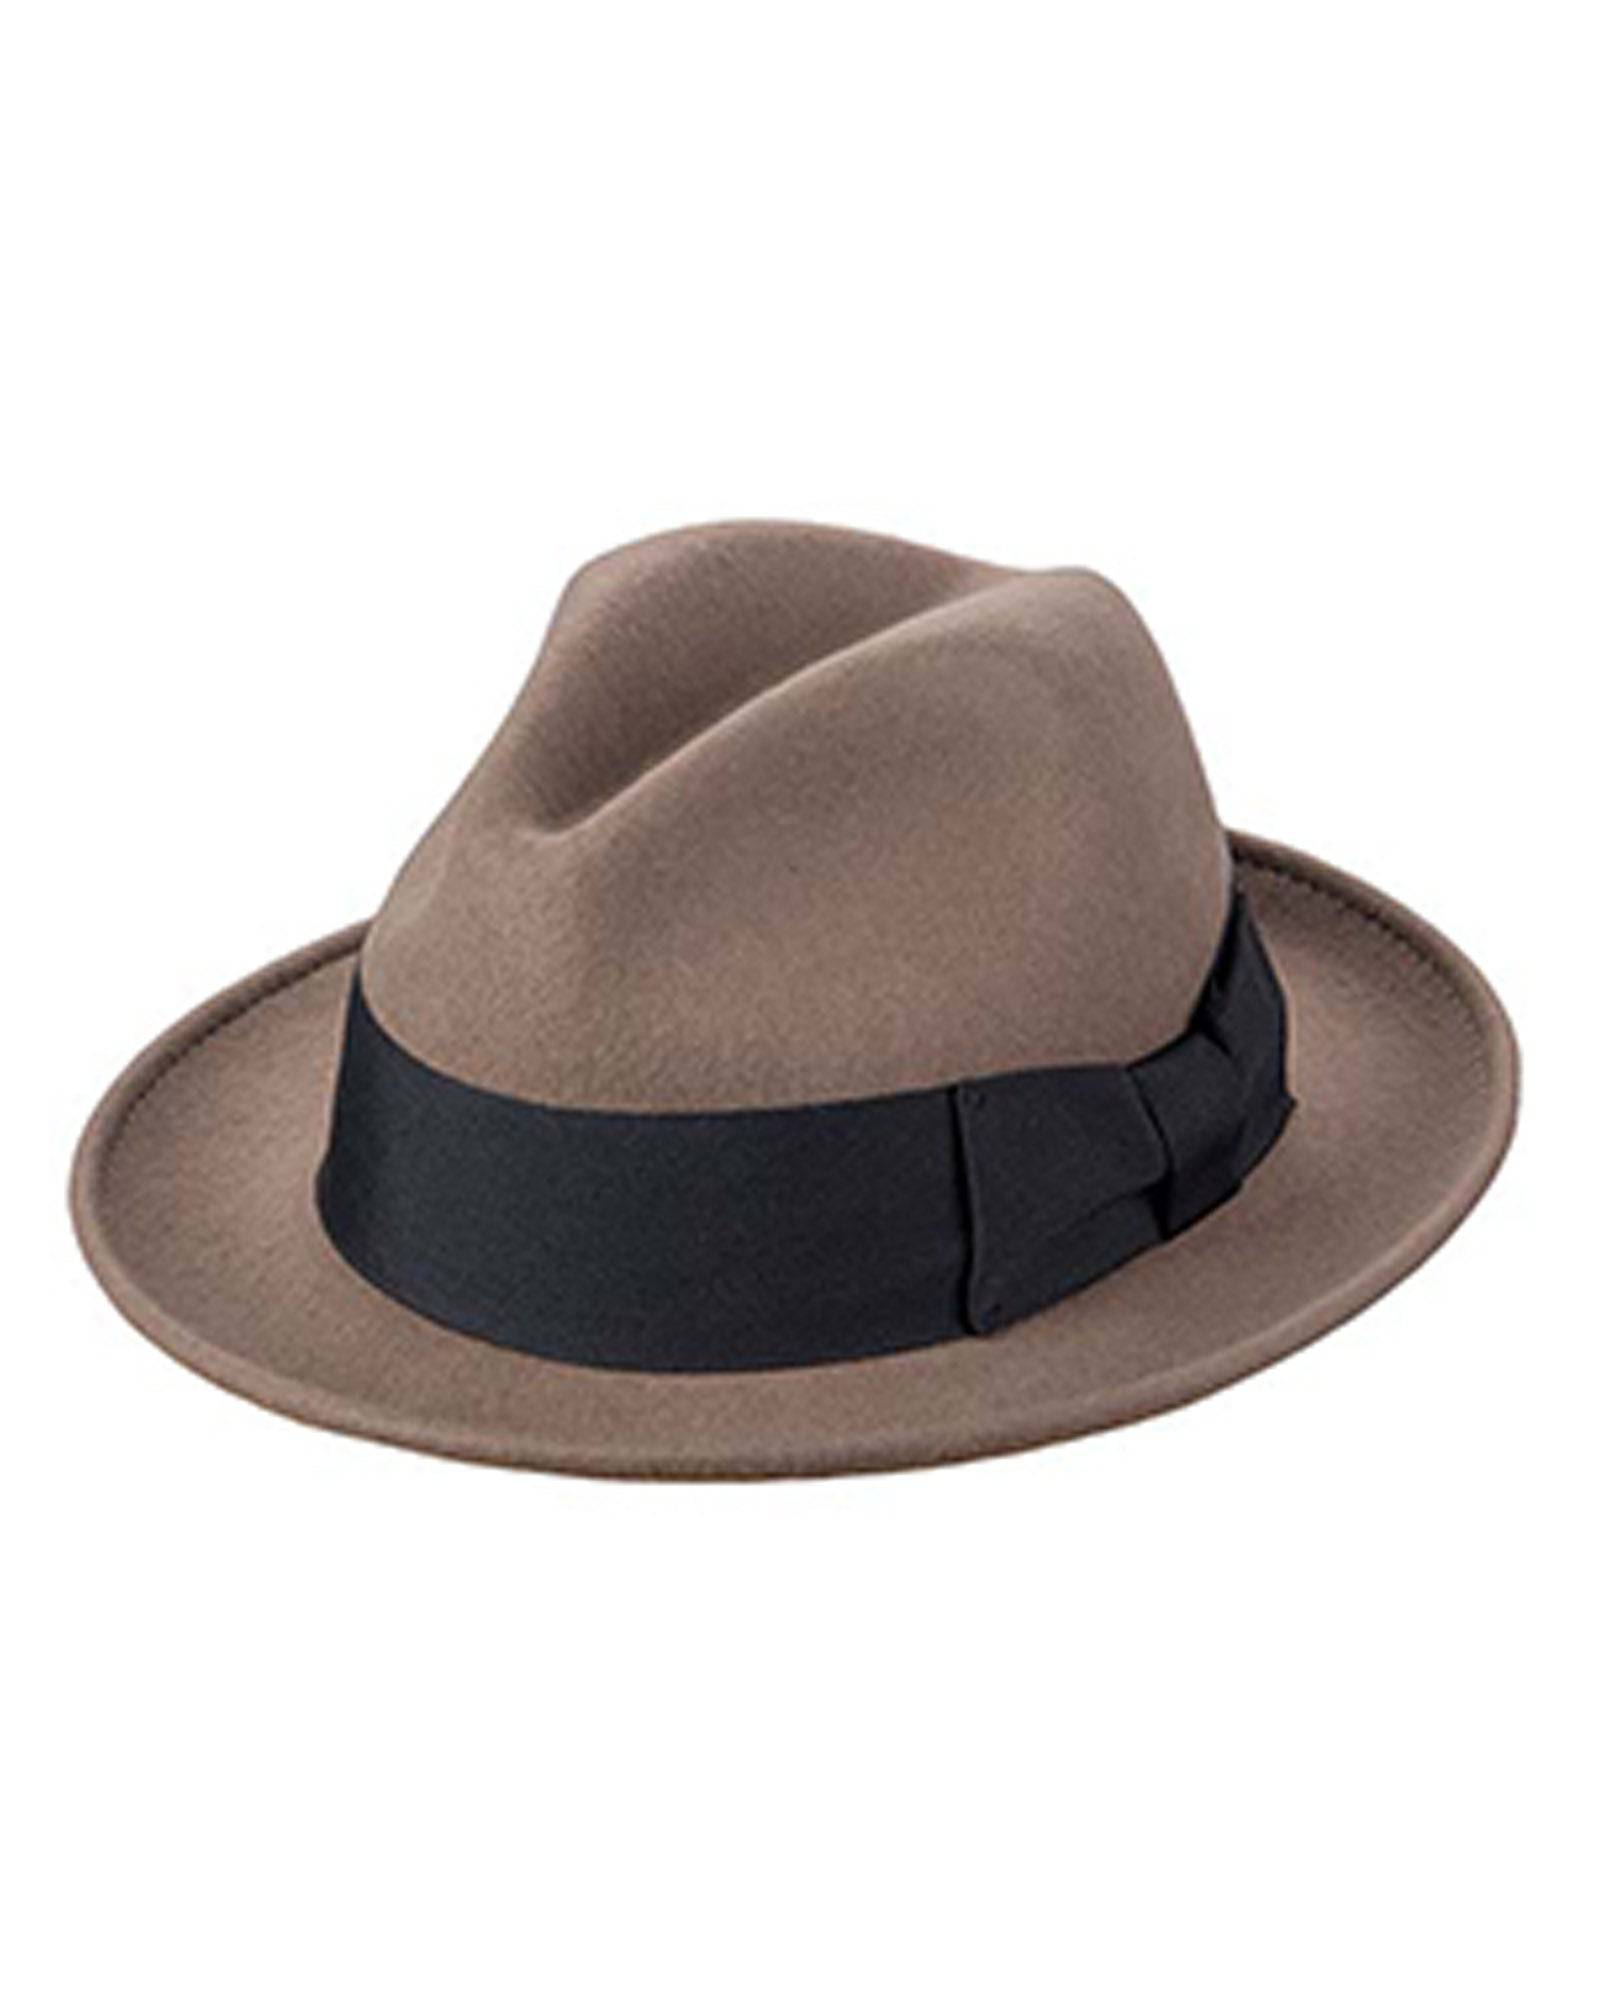 Broner Jimmie Taupe Wool Felt Fedora with 2.75 inch Brim - Rainwater's Men's Clothing and Tuxedo Rental